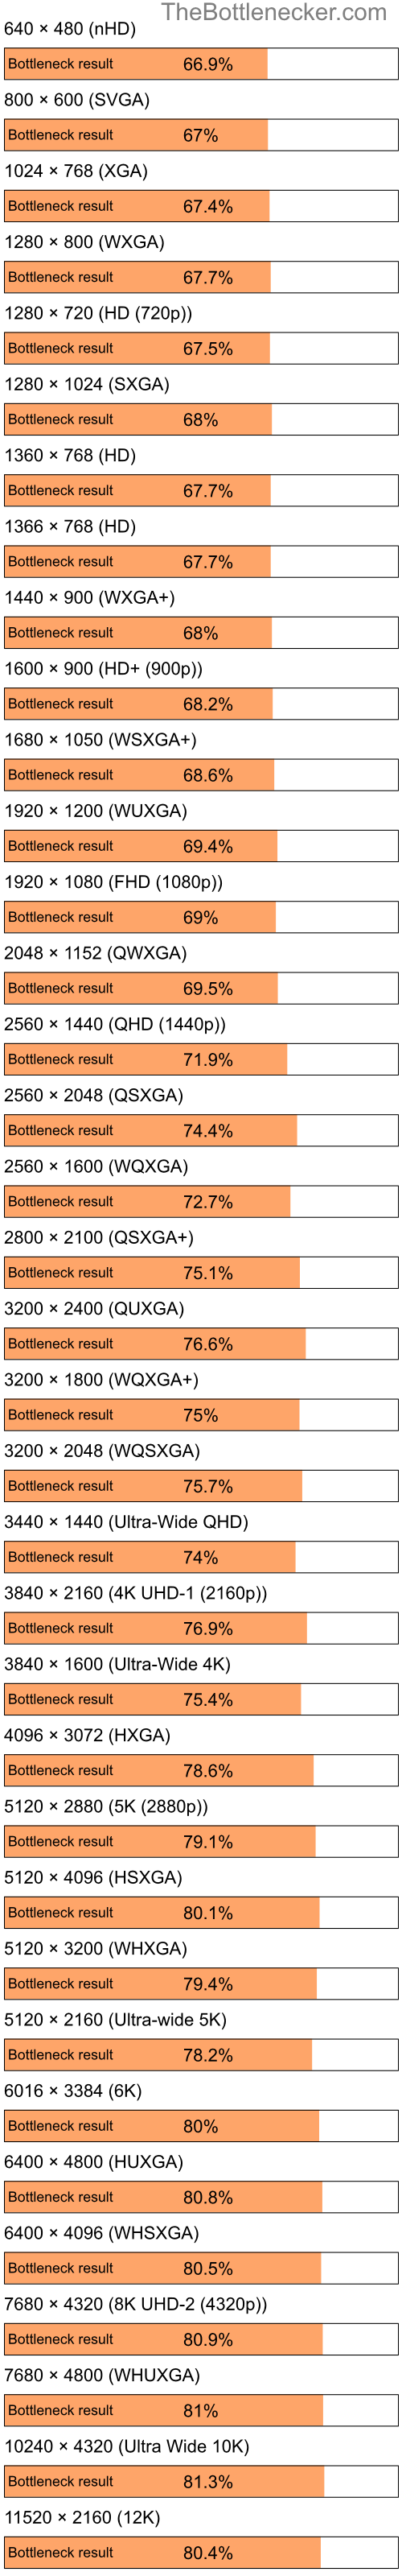 Bottleneck results by resolution for Intel Celeron and NVIDIA Quadro FX 3400 in Graphic Card Intense Tasks